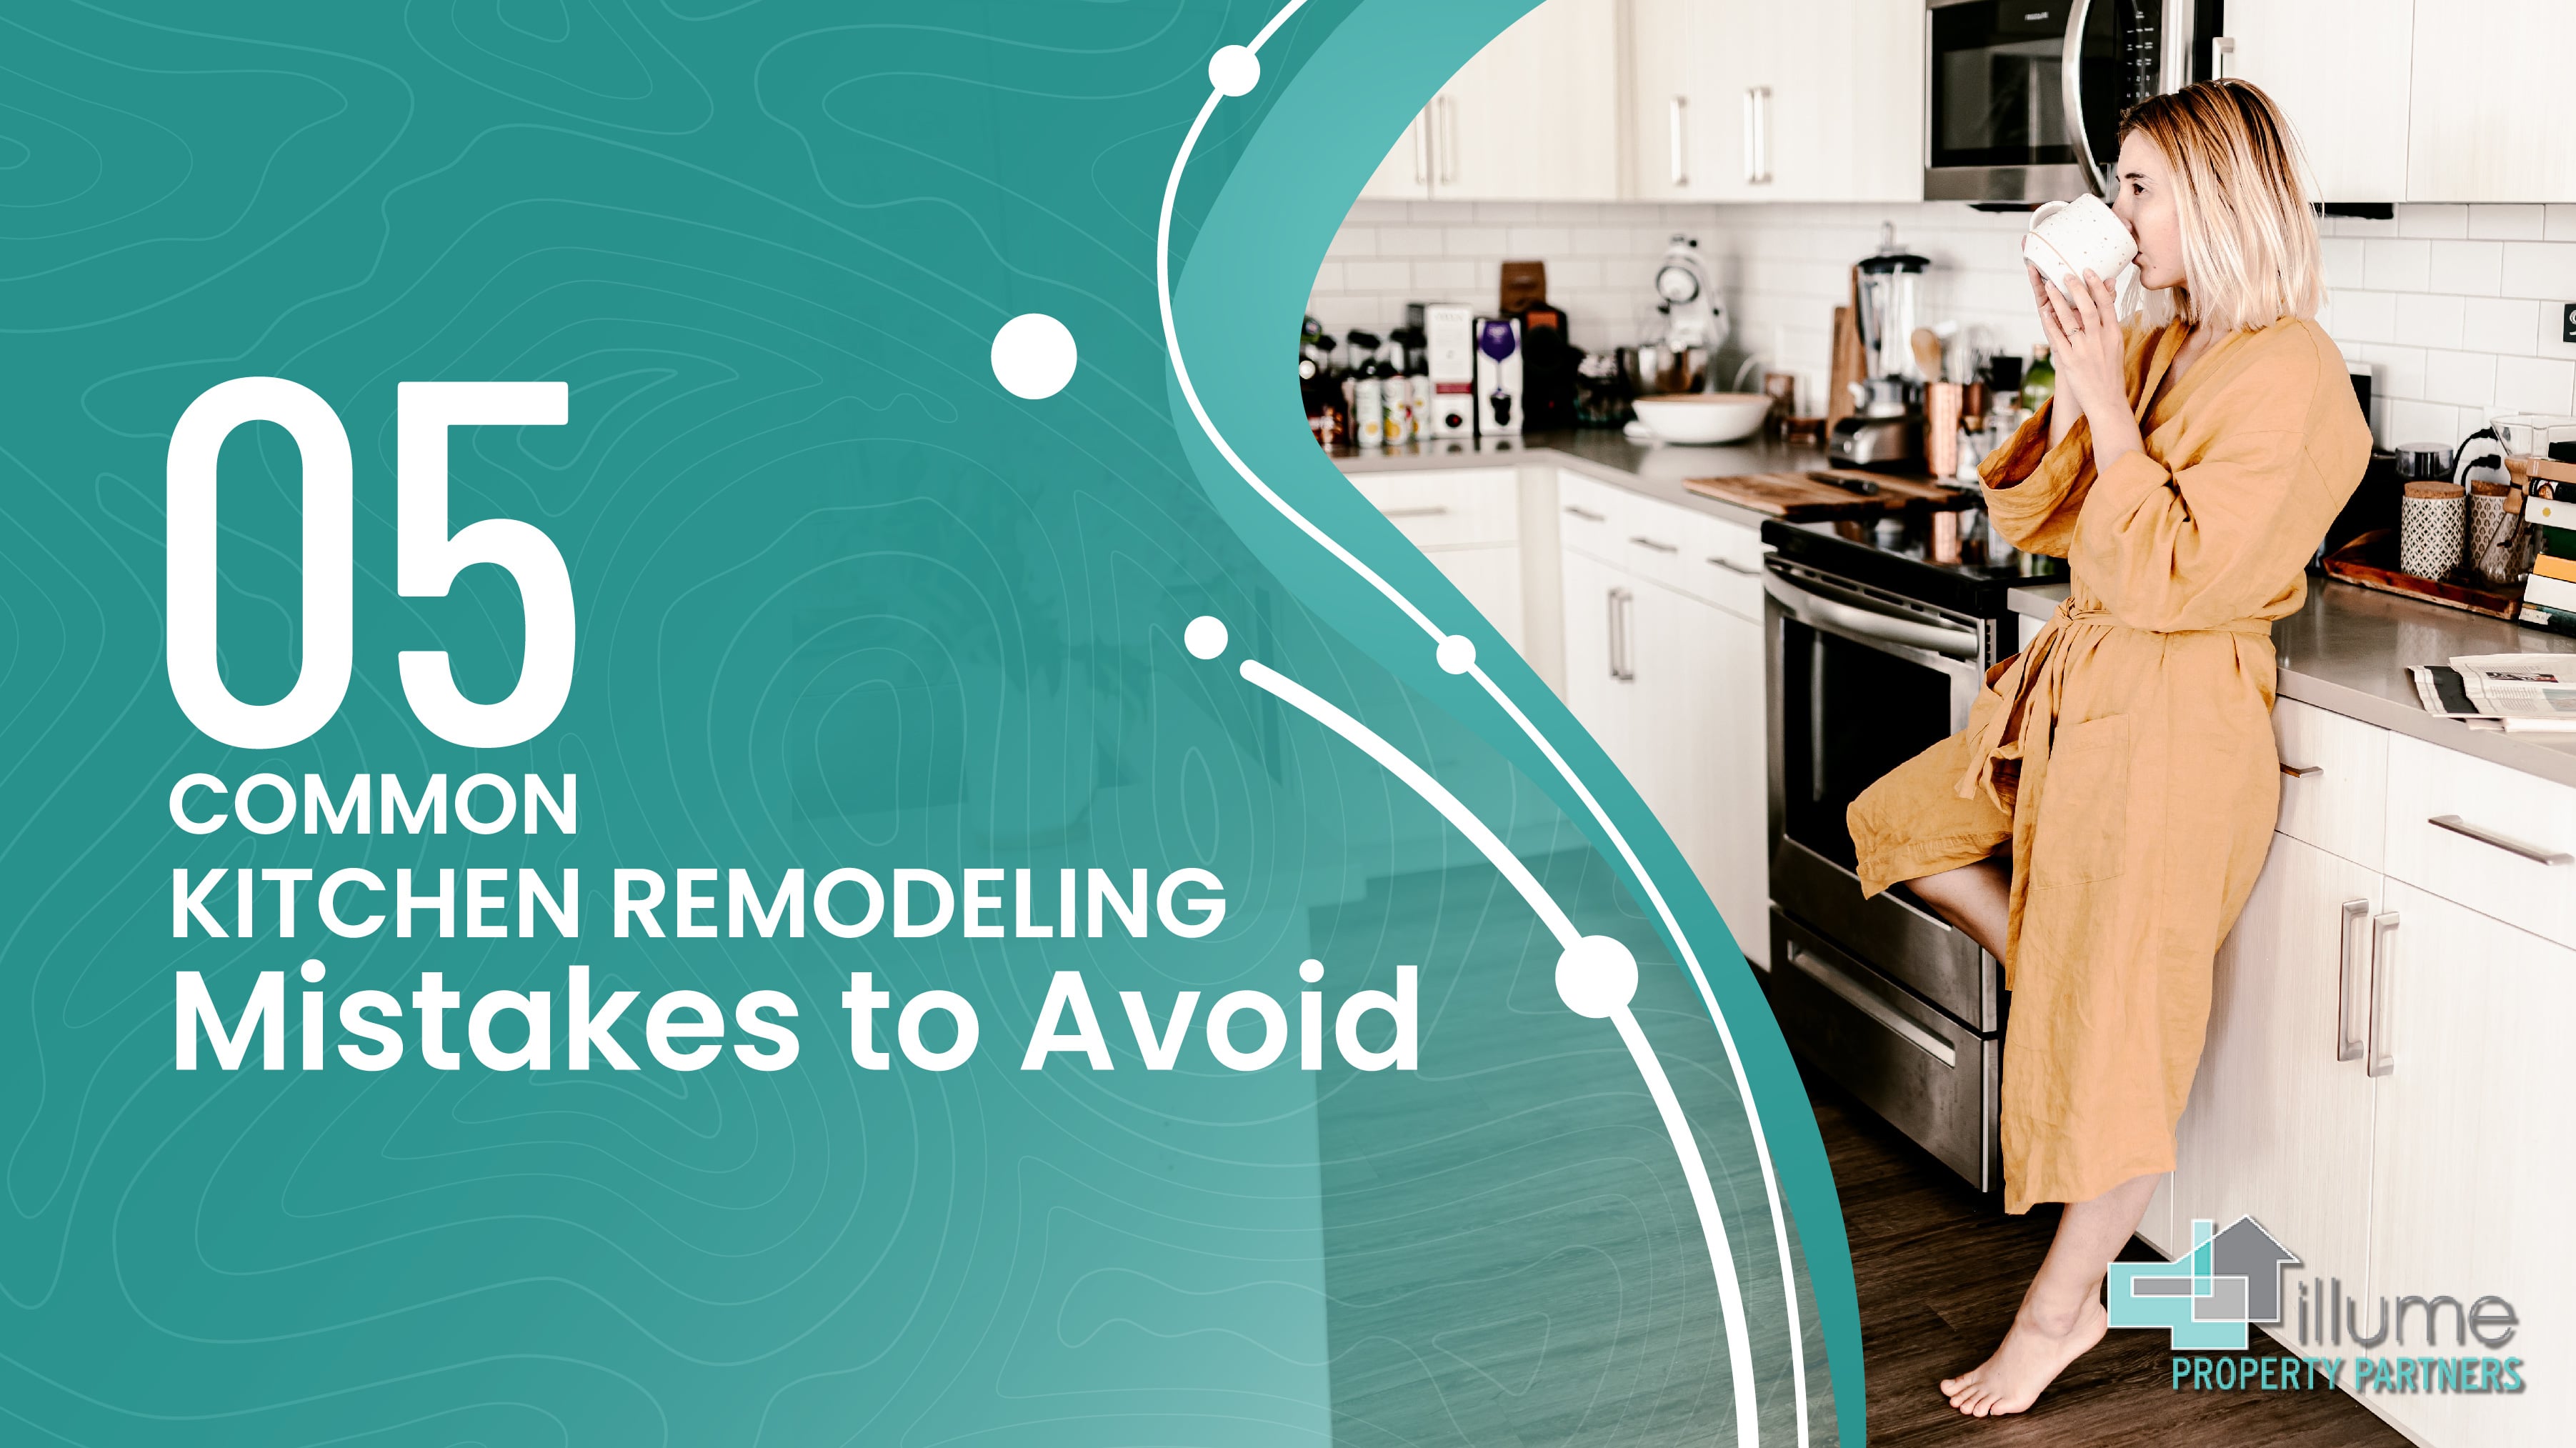 5 Common Kitchen Remodeling Mistakes to Avoid